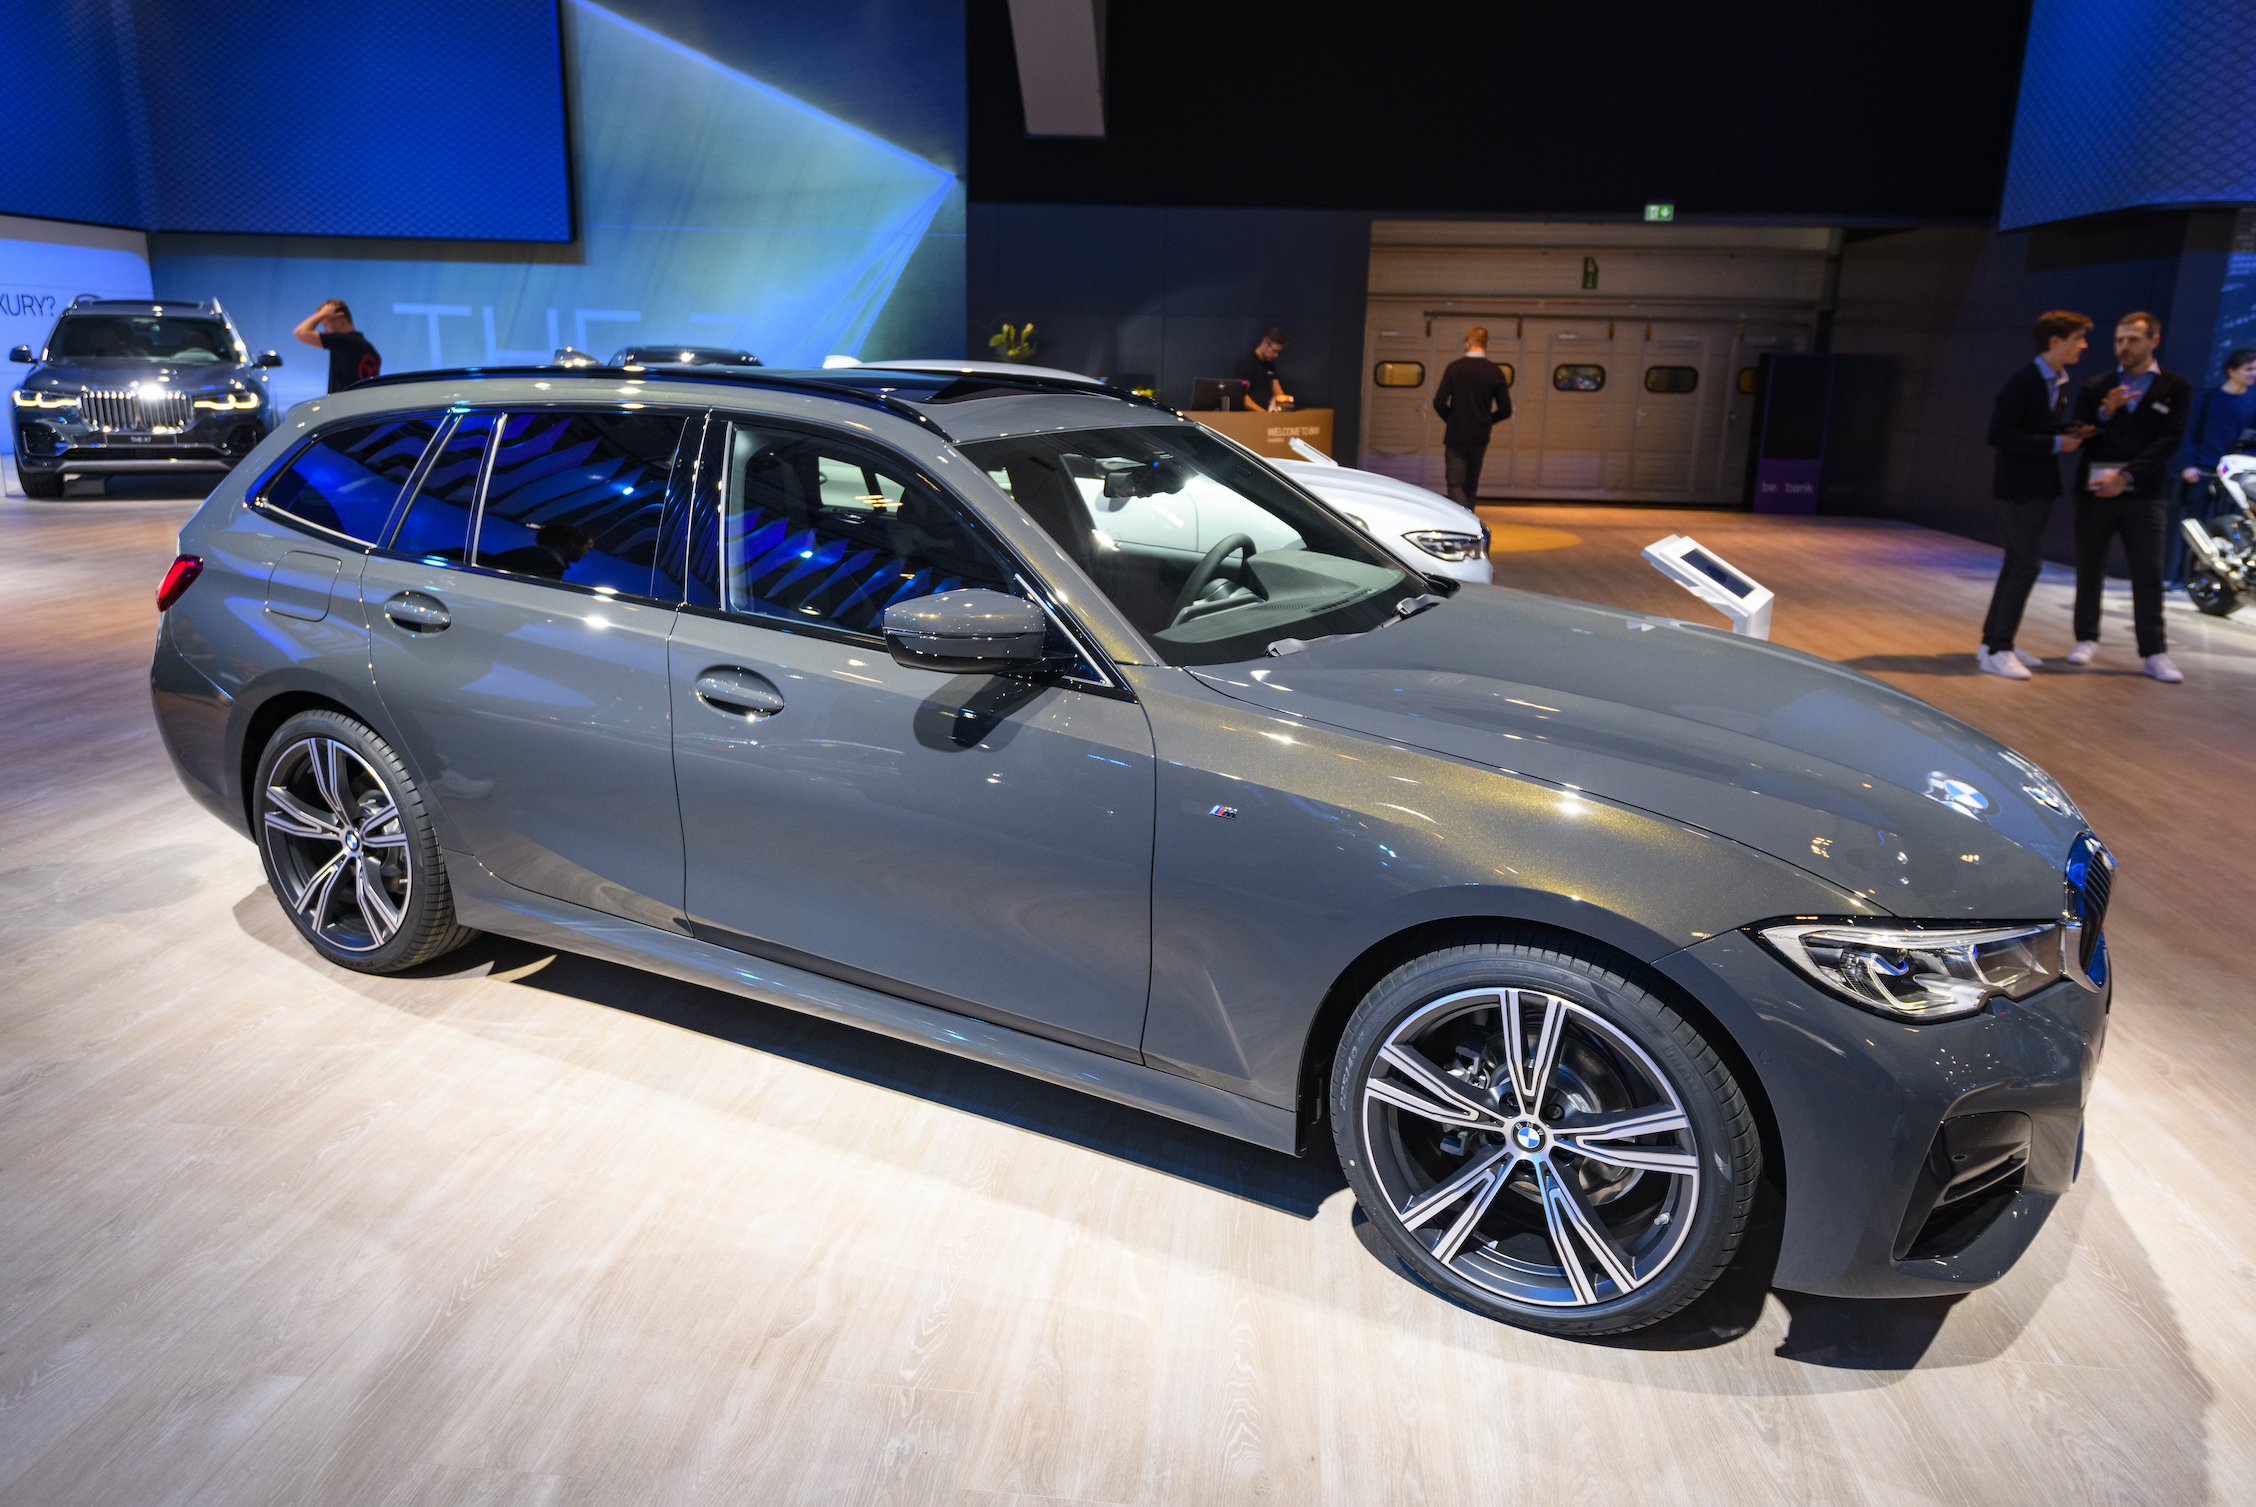 BMW 3 Series Touring station wagon on display at Brussels Expo